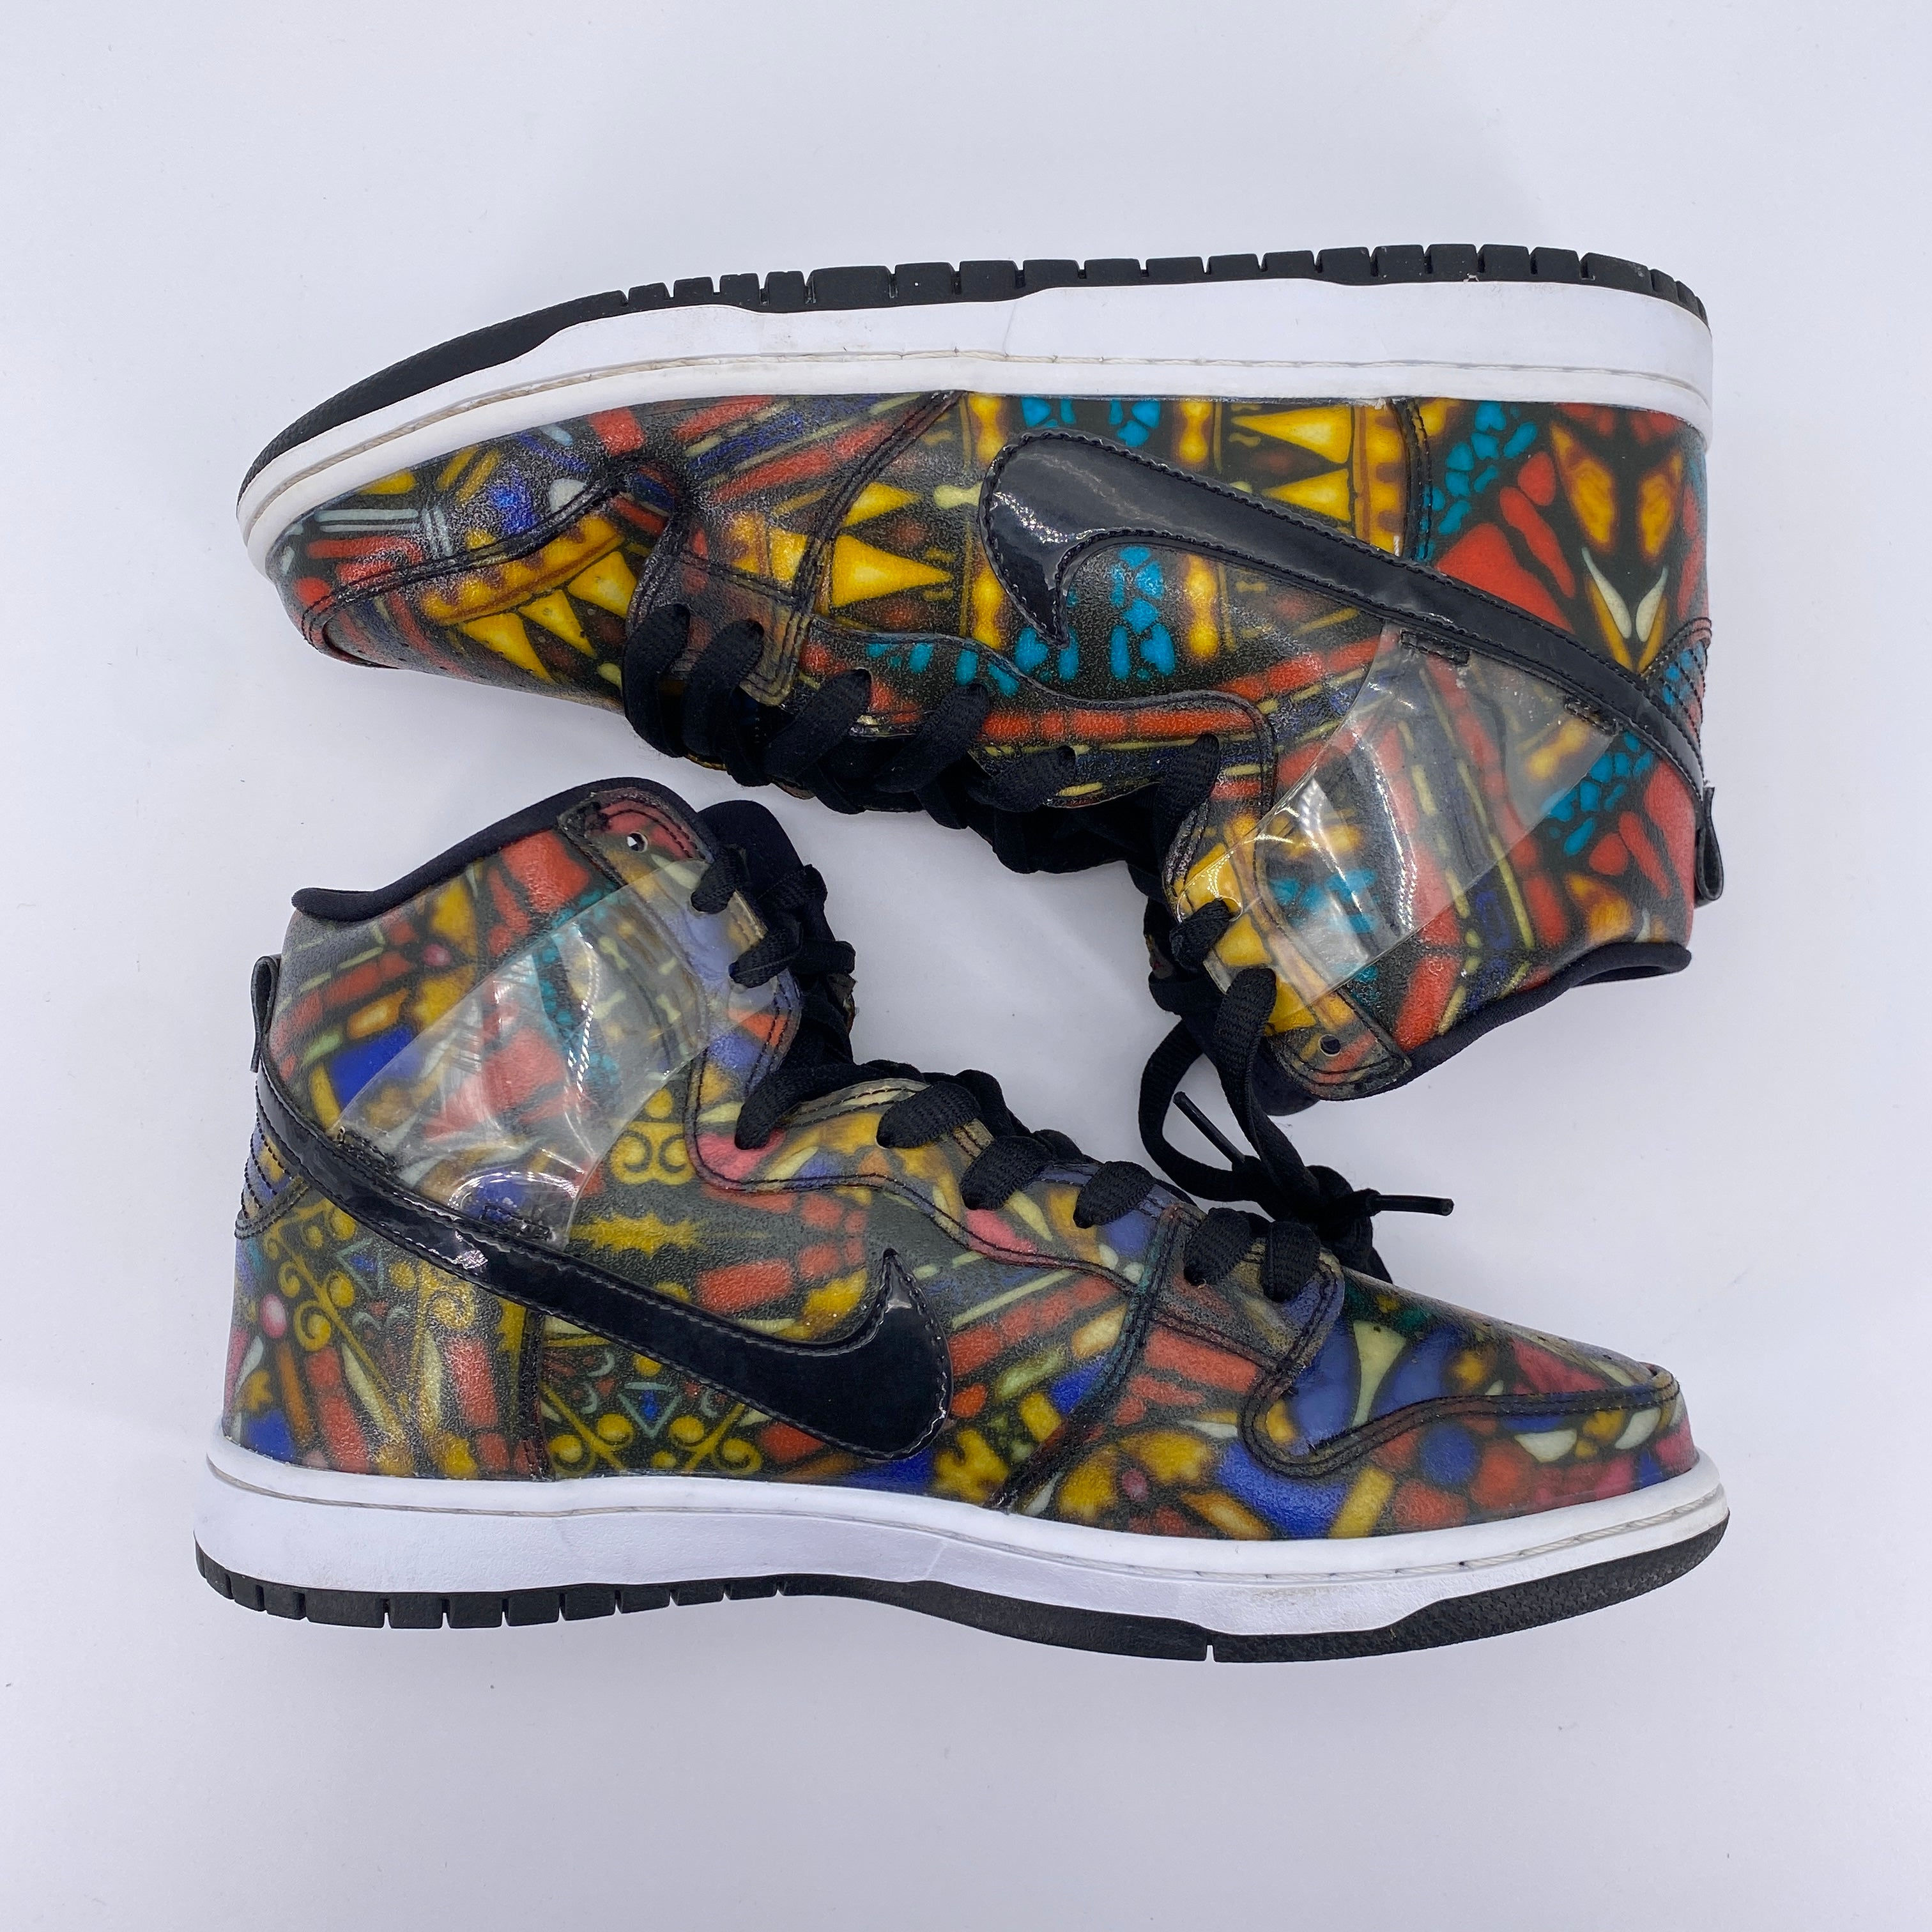 Nike SB Dunk High "Stained Glass" 2015 Used Size 10